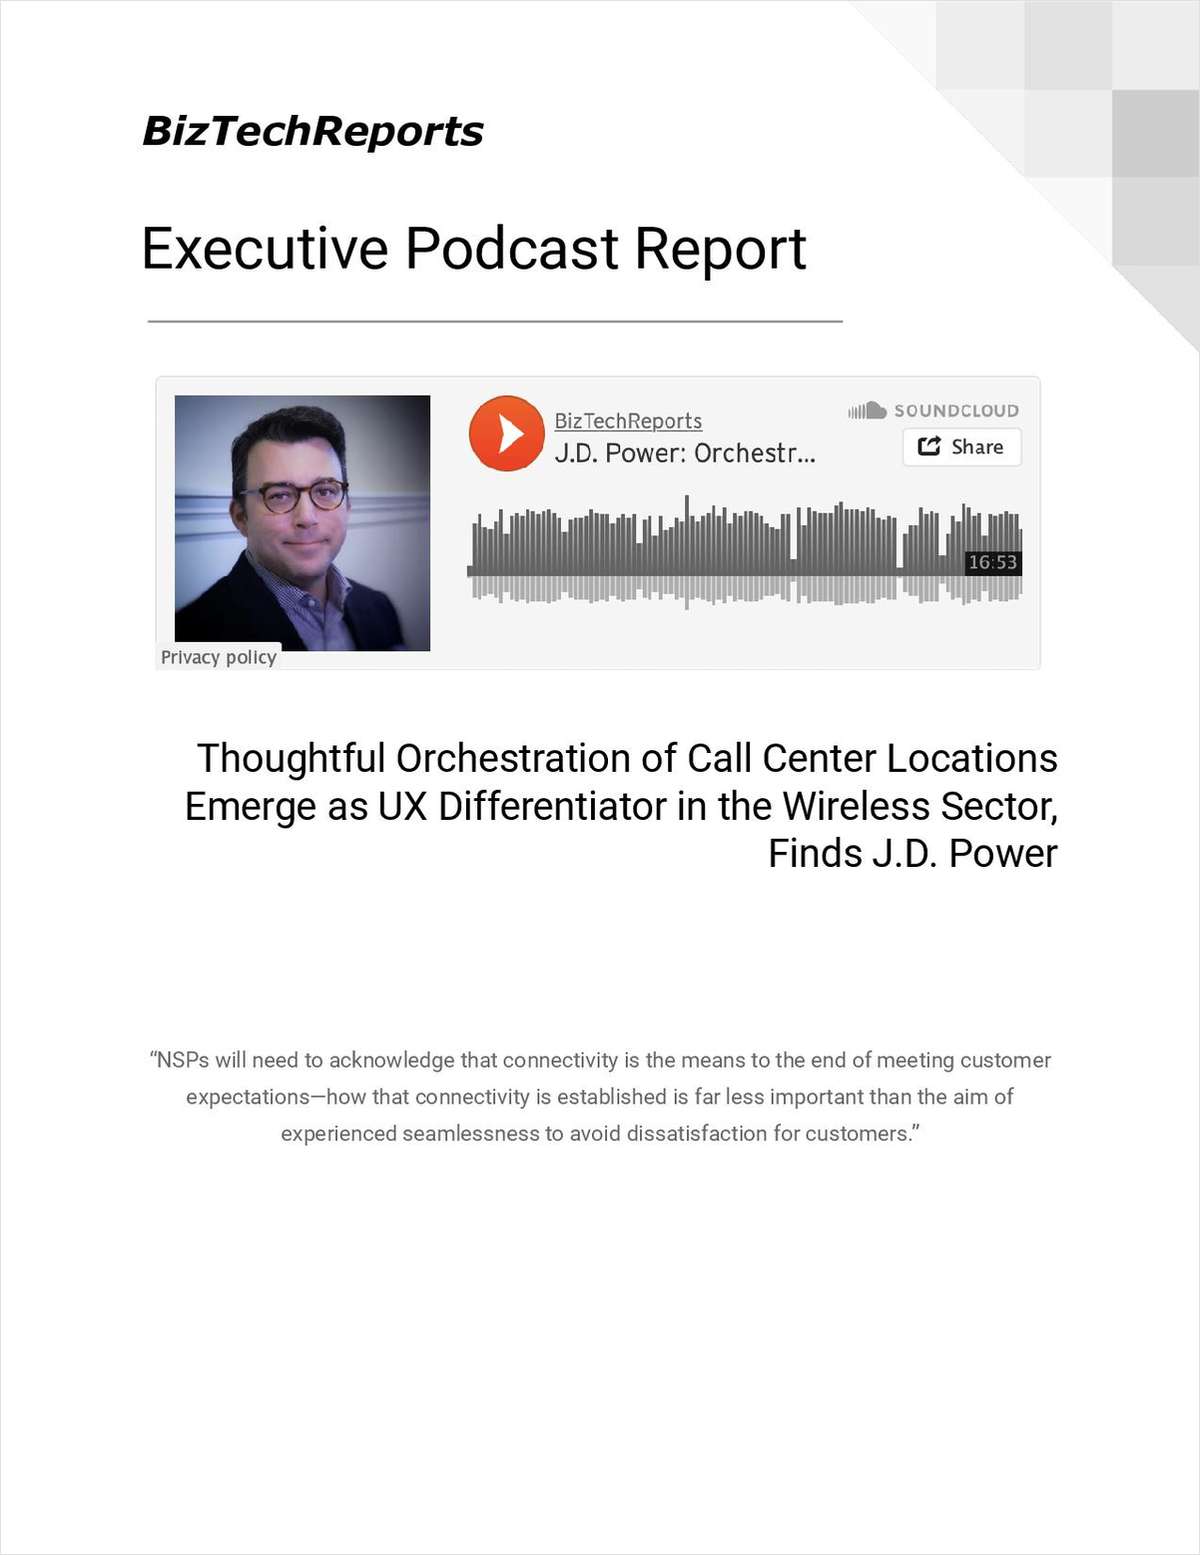 Thoughtful Orchestration of Call Center Locations Emerge as UX Differentiator in the Wireless Sector, Finds J.D. Power